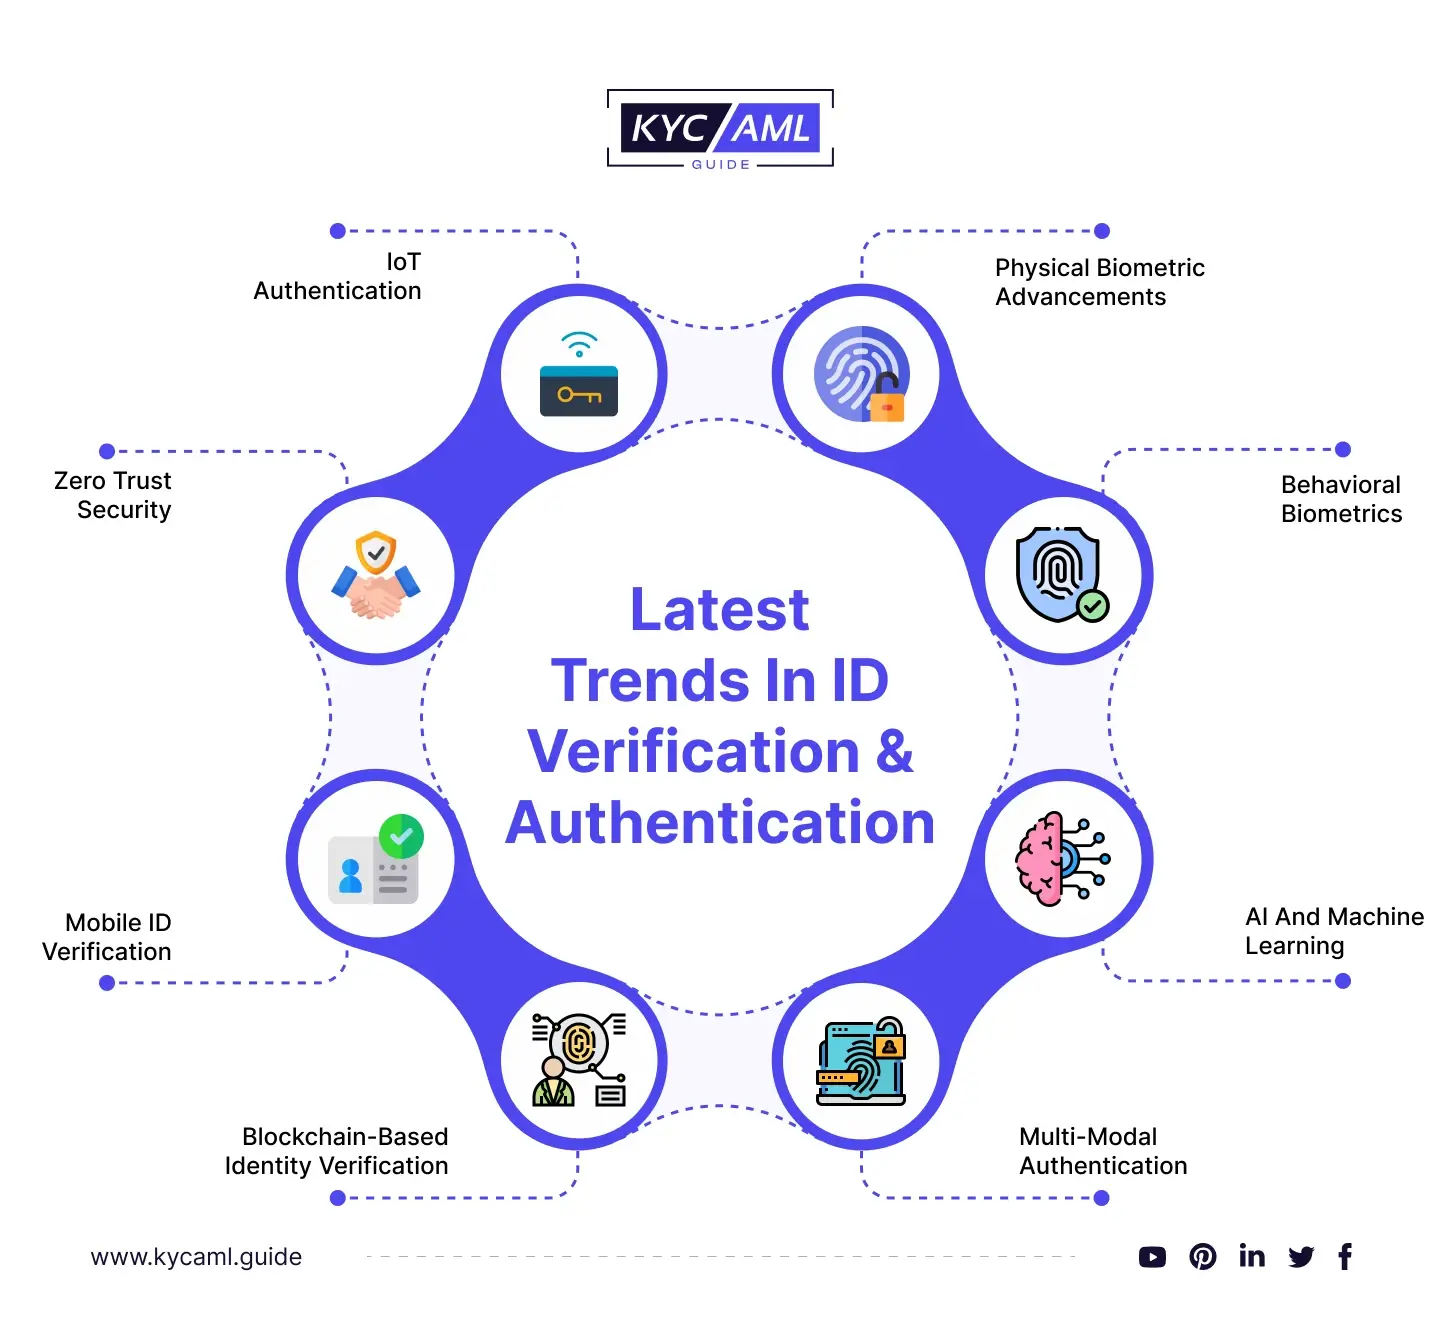 Latest Trends in ID Verification & Authentication